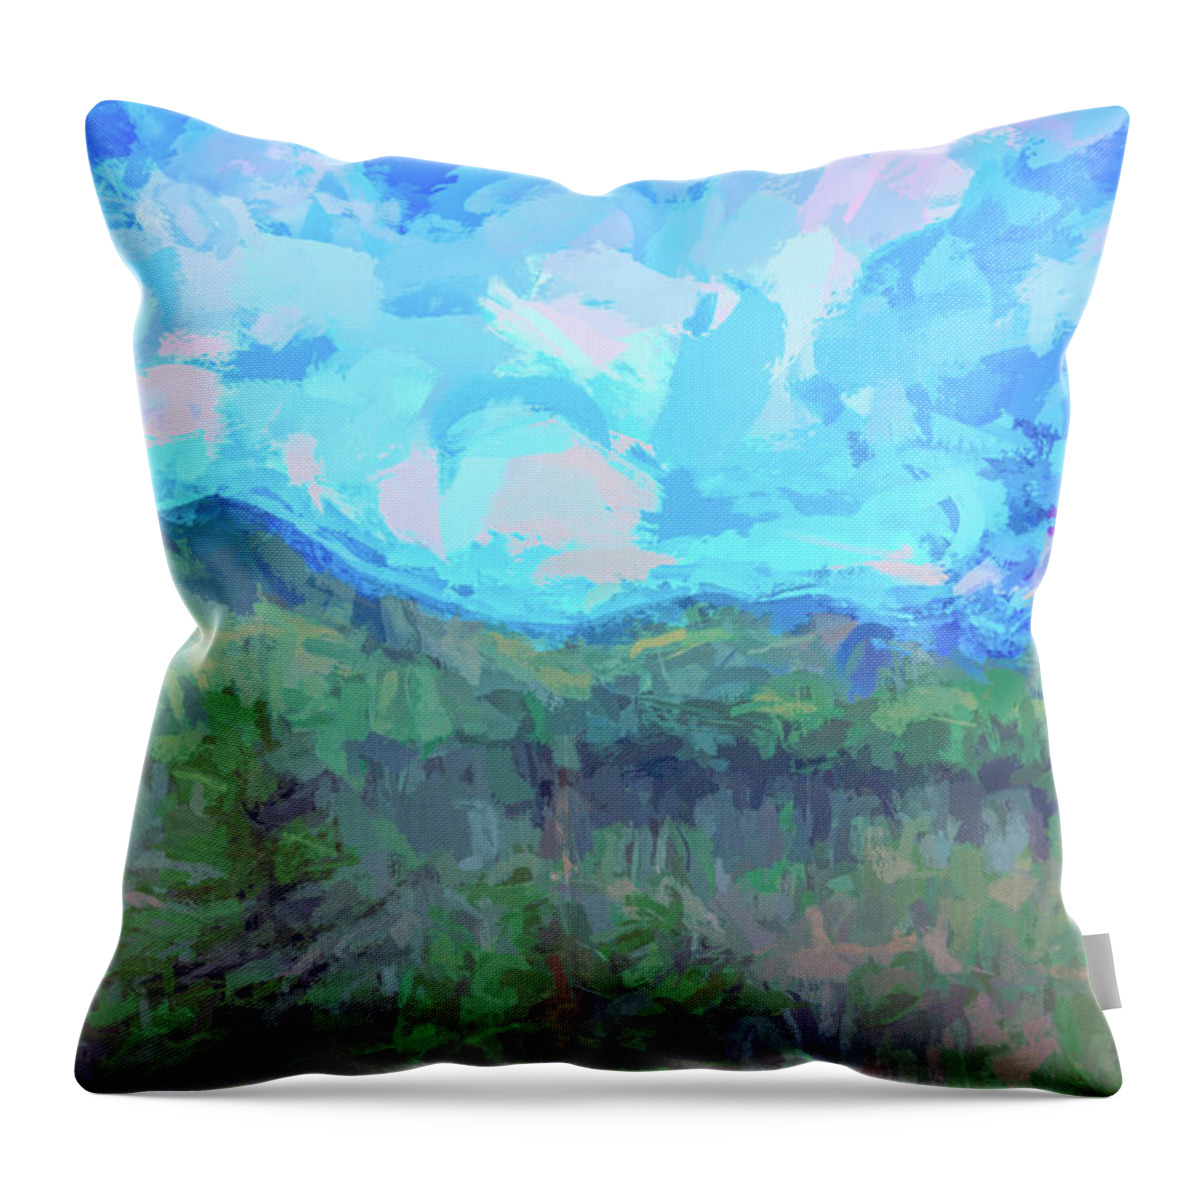 Cascades Mountains Throw Pillow featuring the digital art Cascades Abstract Landscapes by Cathy Anderson